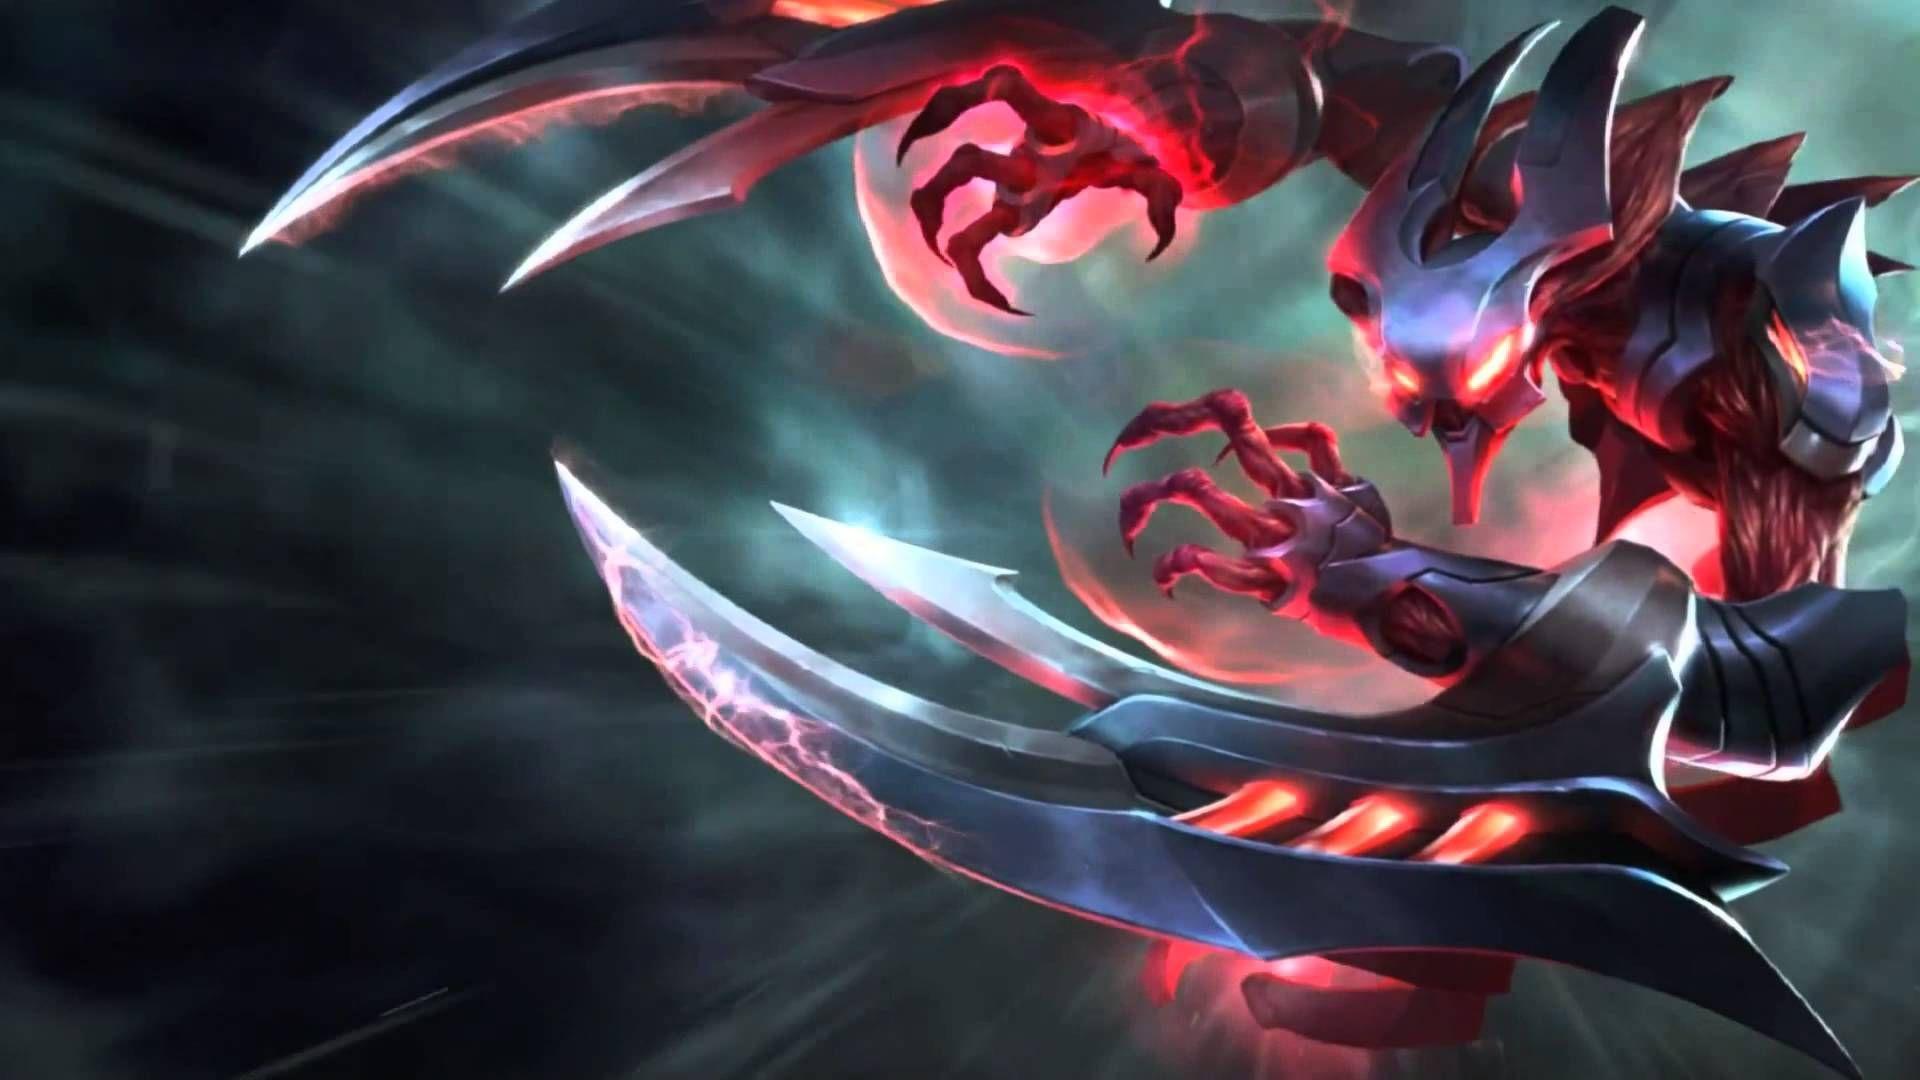 ravager nocturne chinese